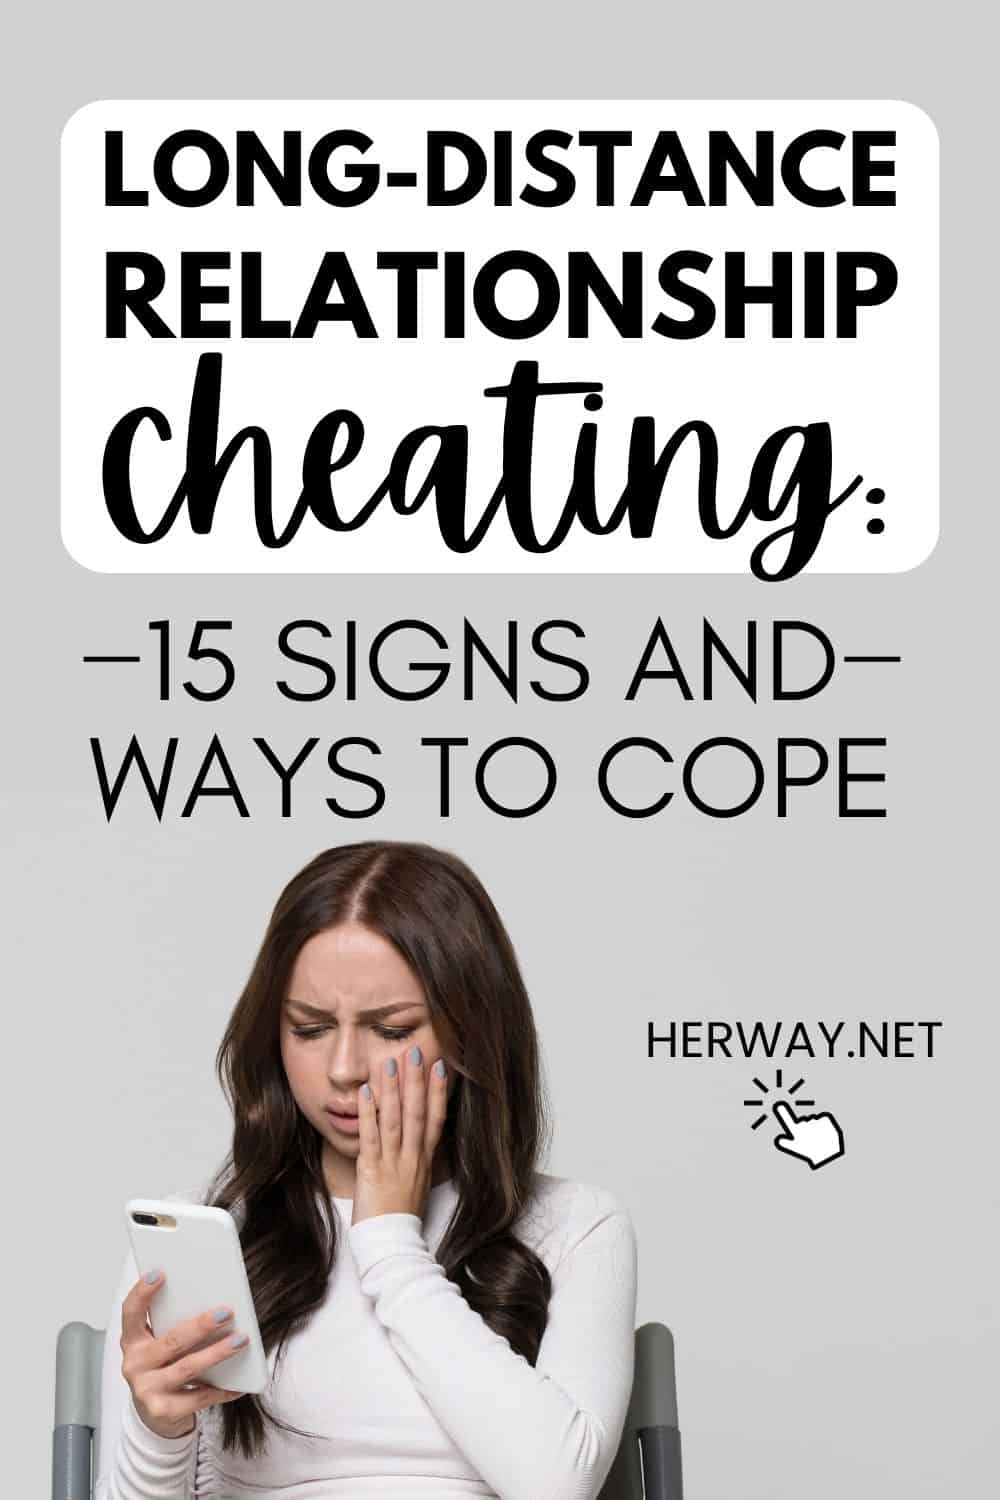 Long-Distance Relationship Cheating 15 Signs And Ways To Cope Pinterest